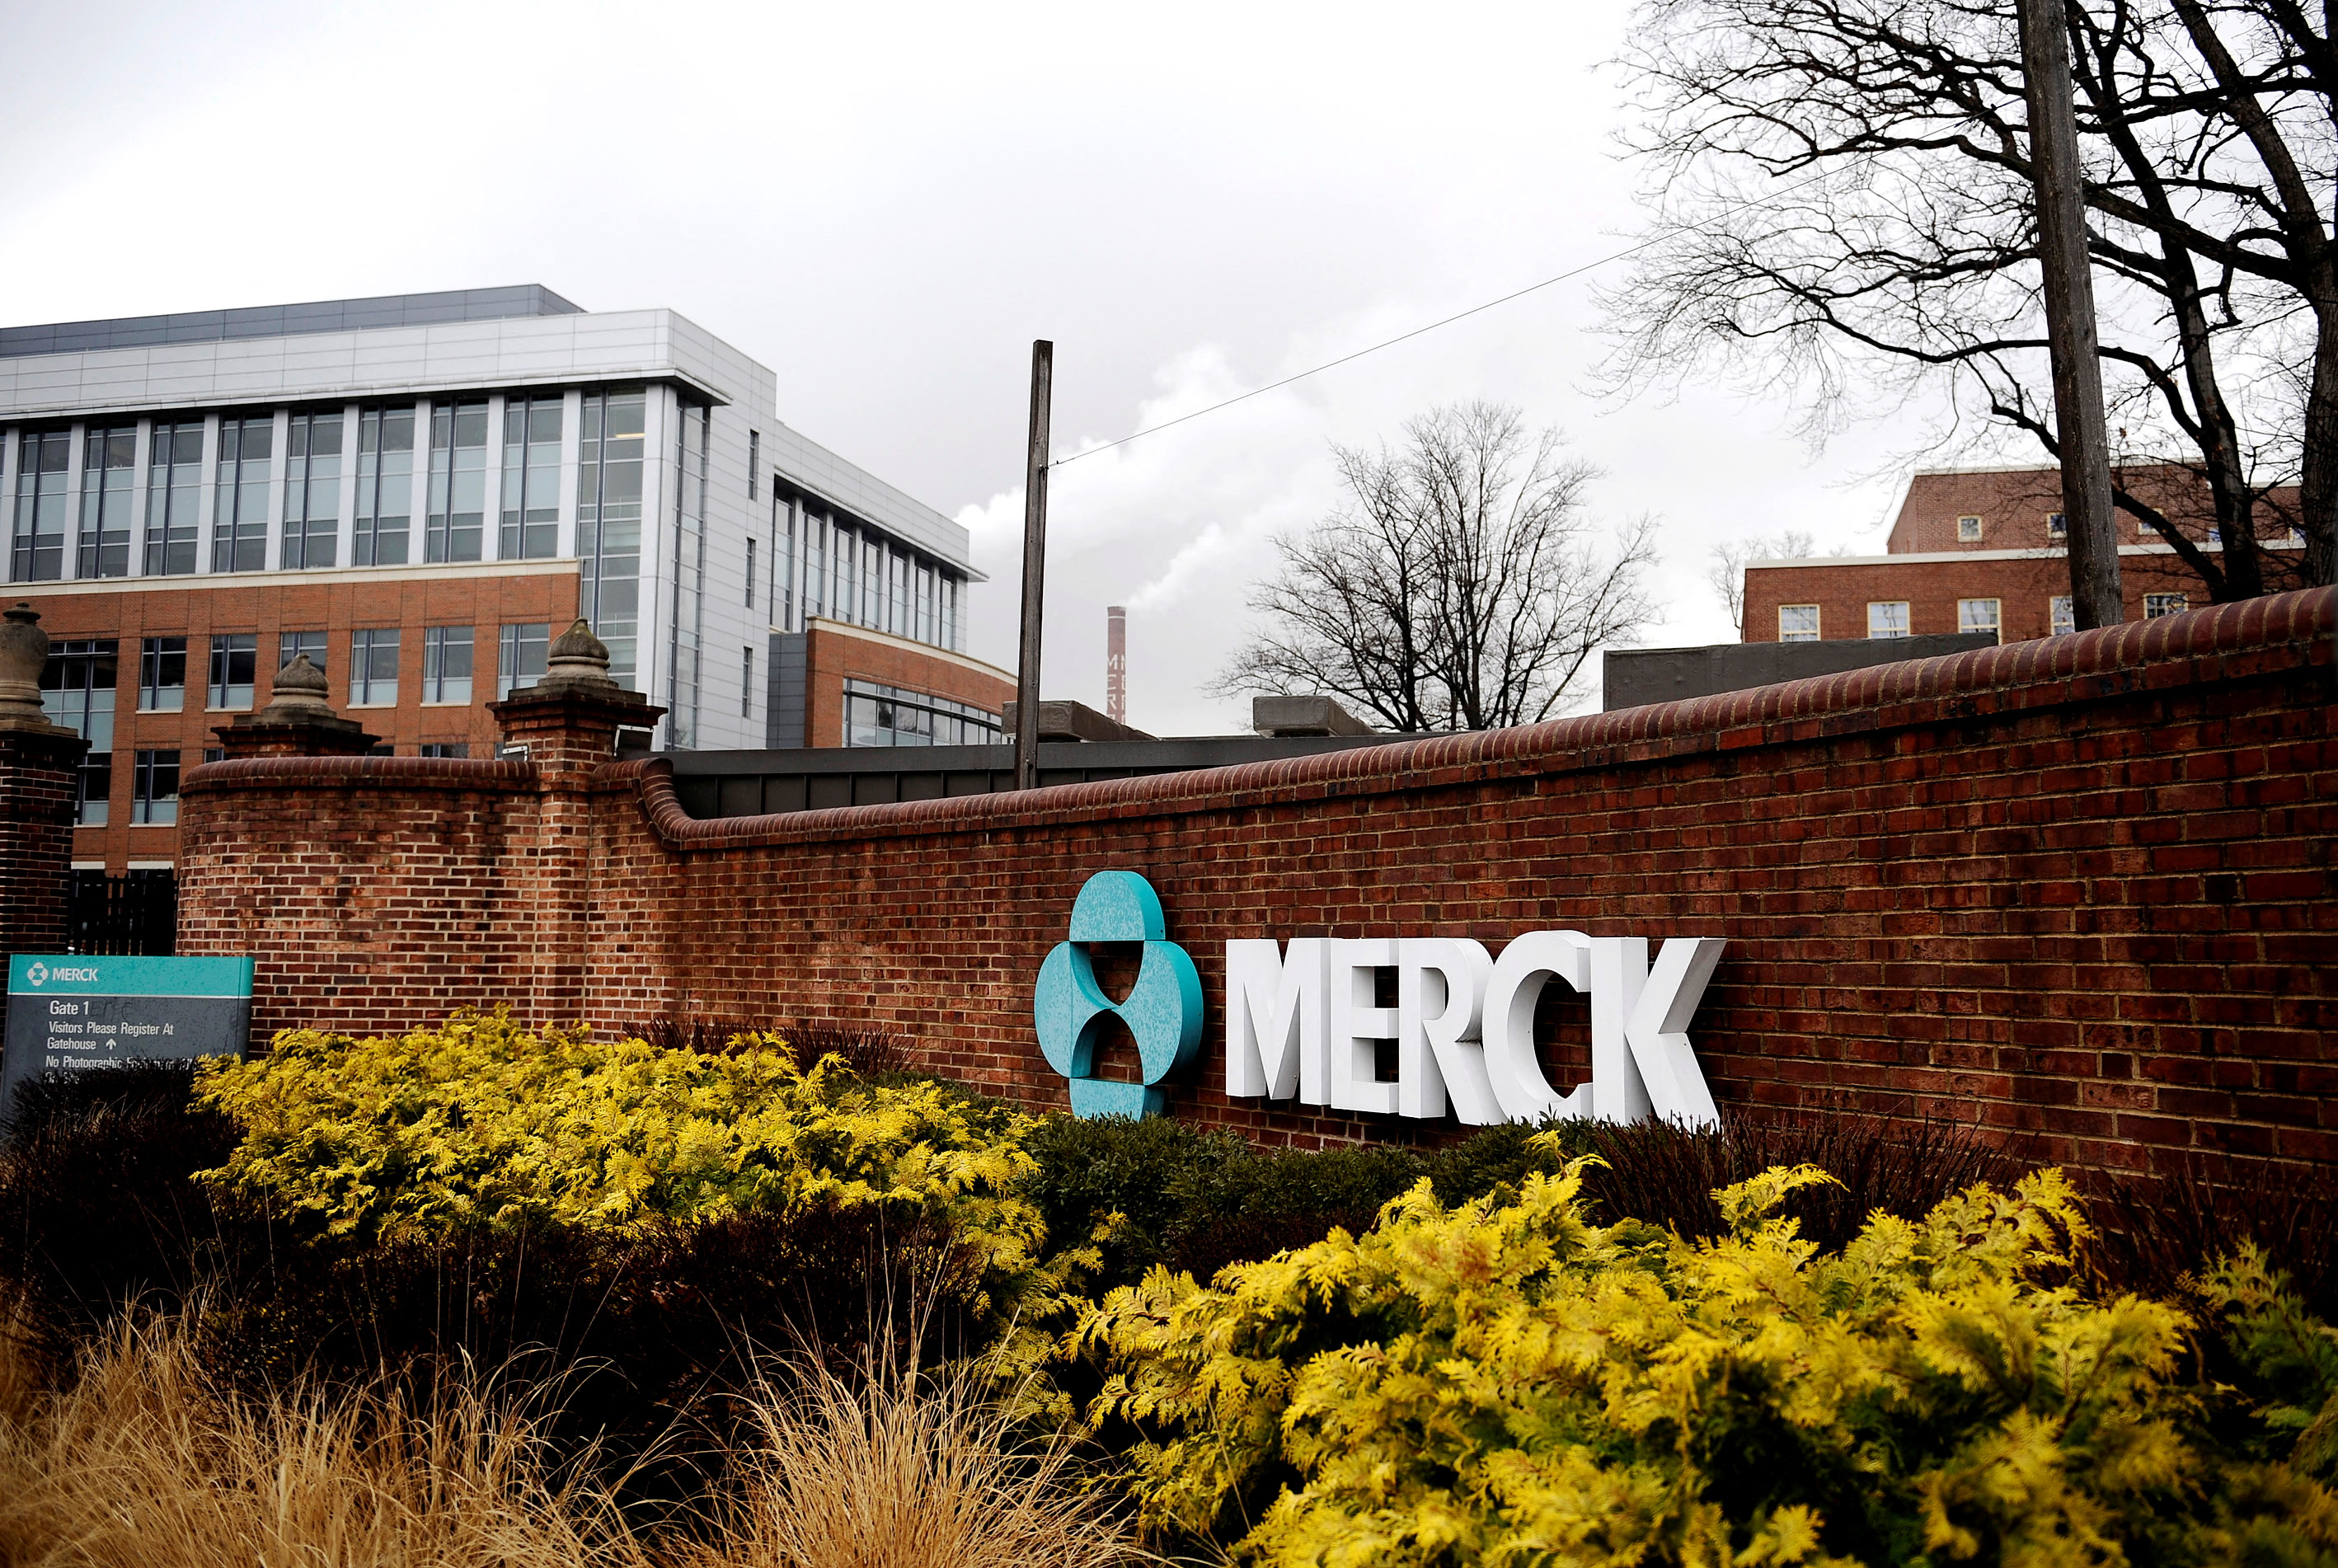 A view of the Merck & Co. campus in Linden, New Jersey